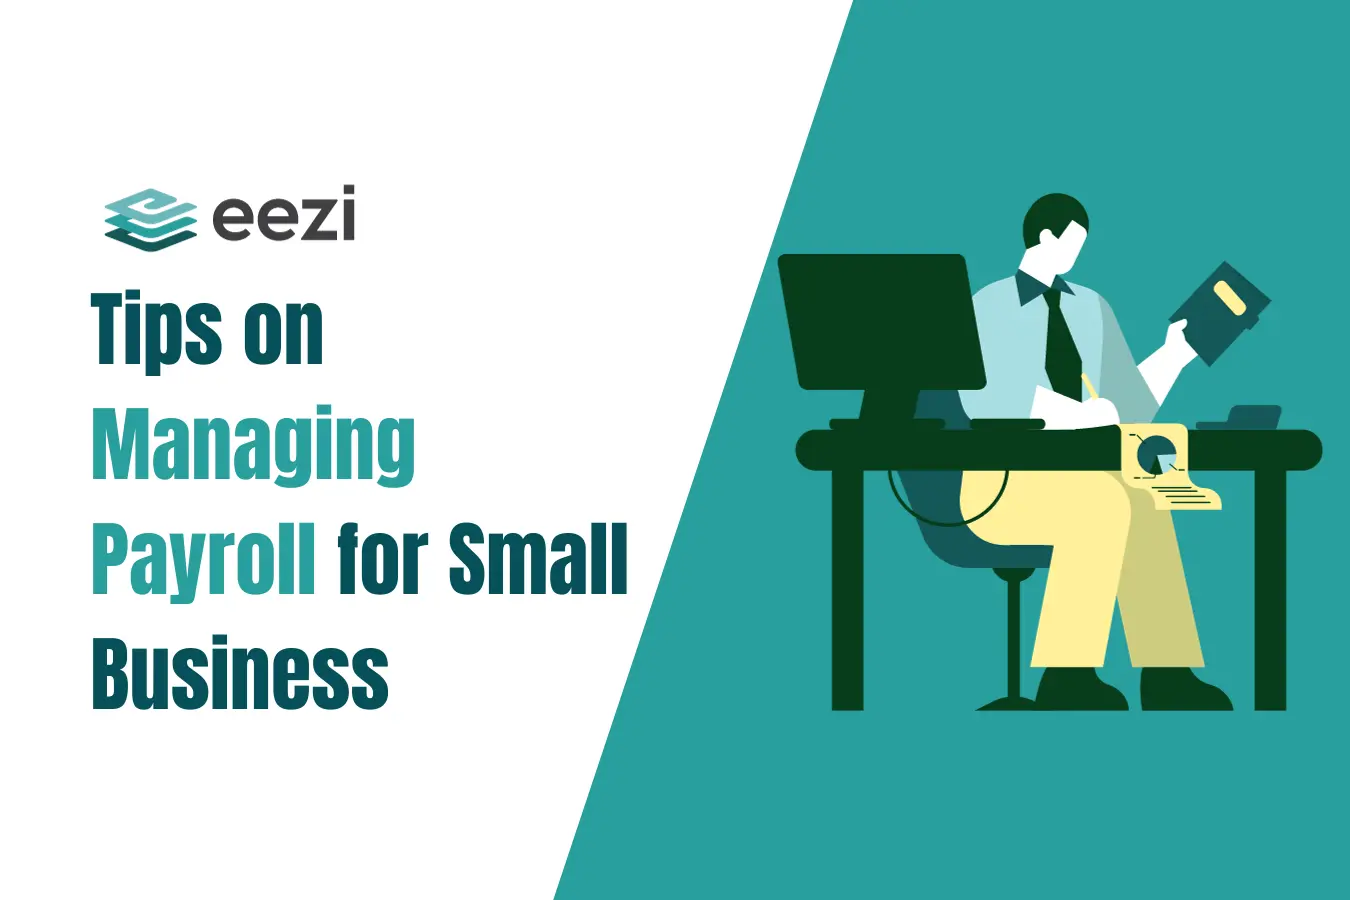 Tips on Managing Payroll for Small Business